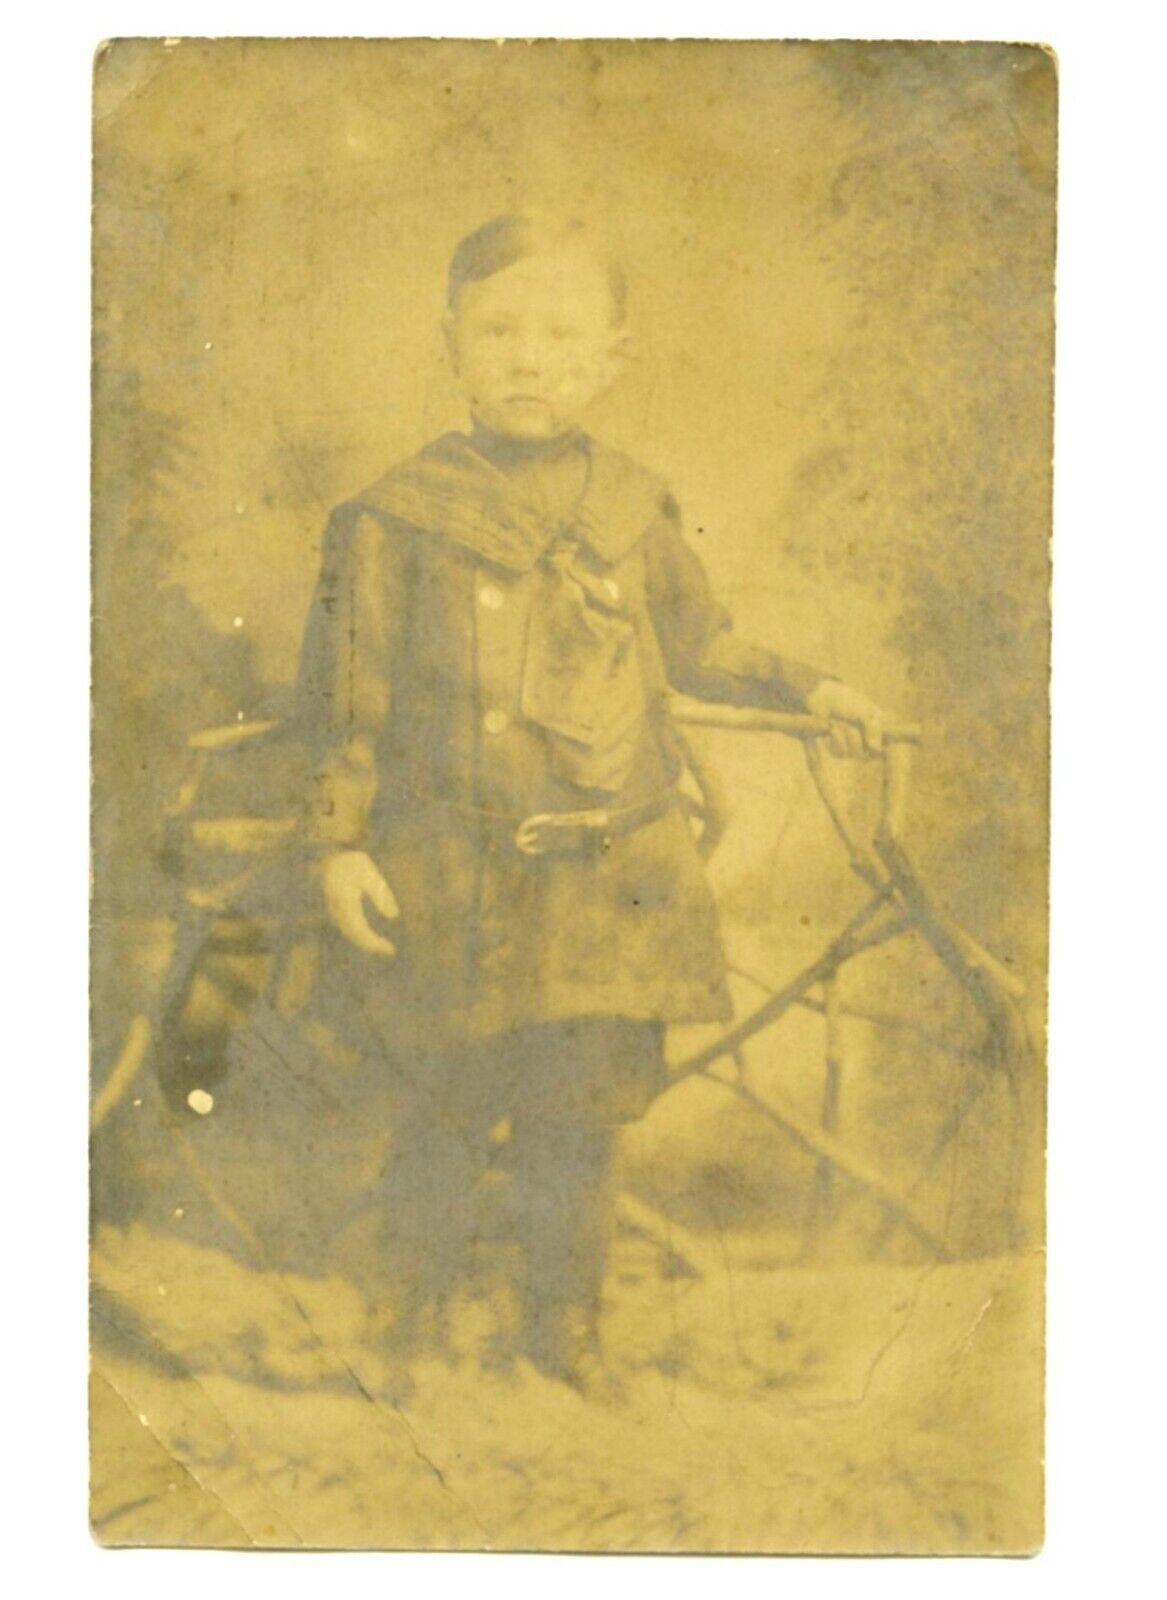 1909 RPPC Small Boy in Interesting Outfit Postcard   Posing  Unique   C Photos